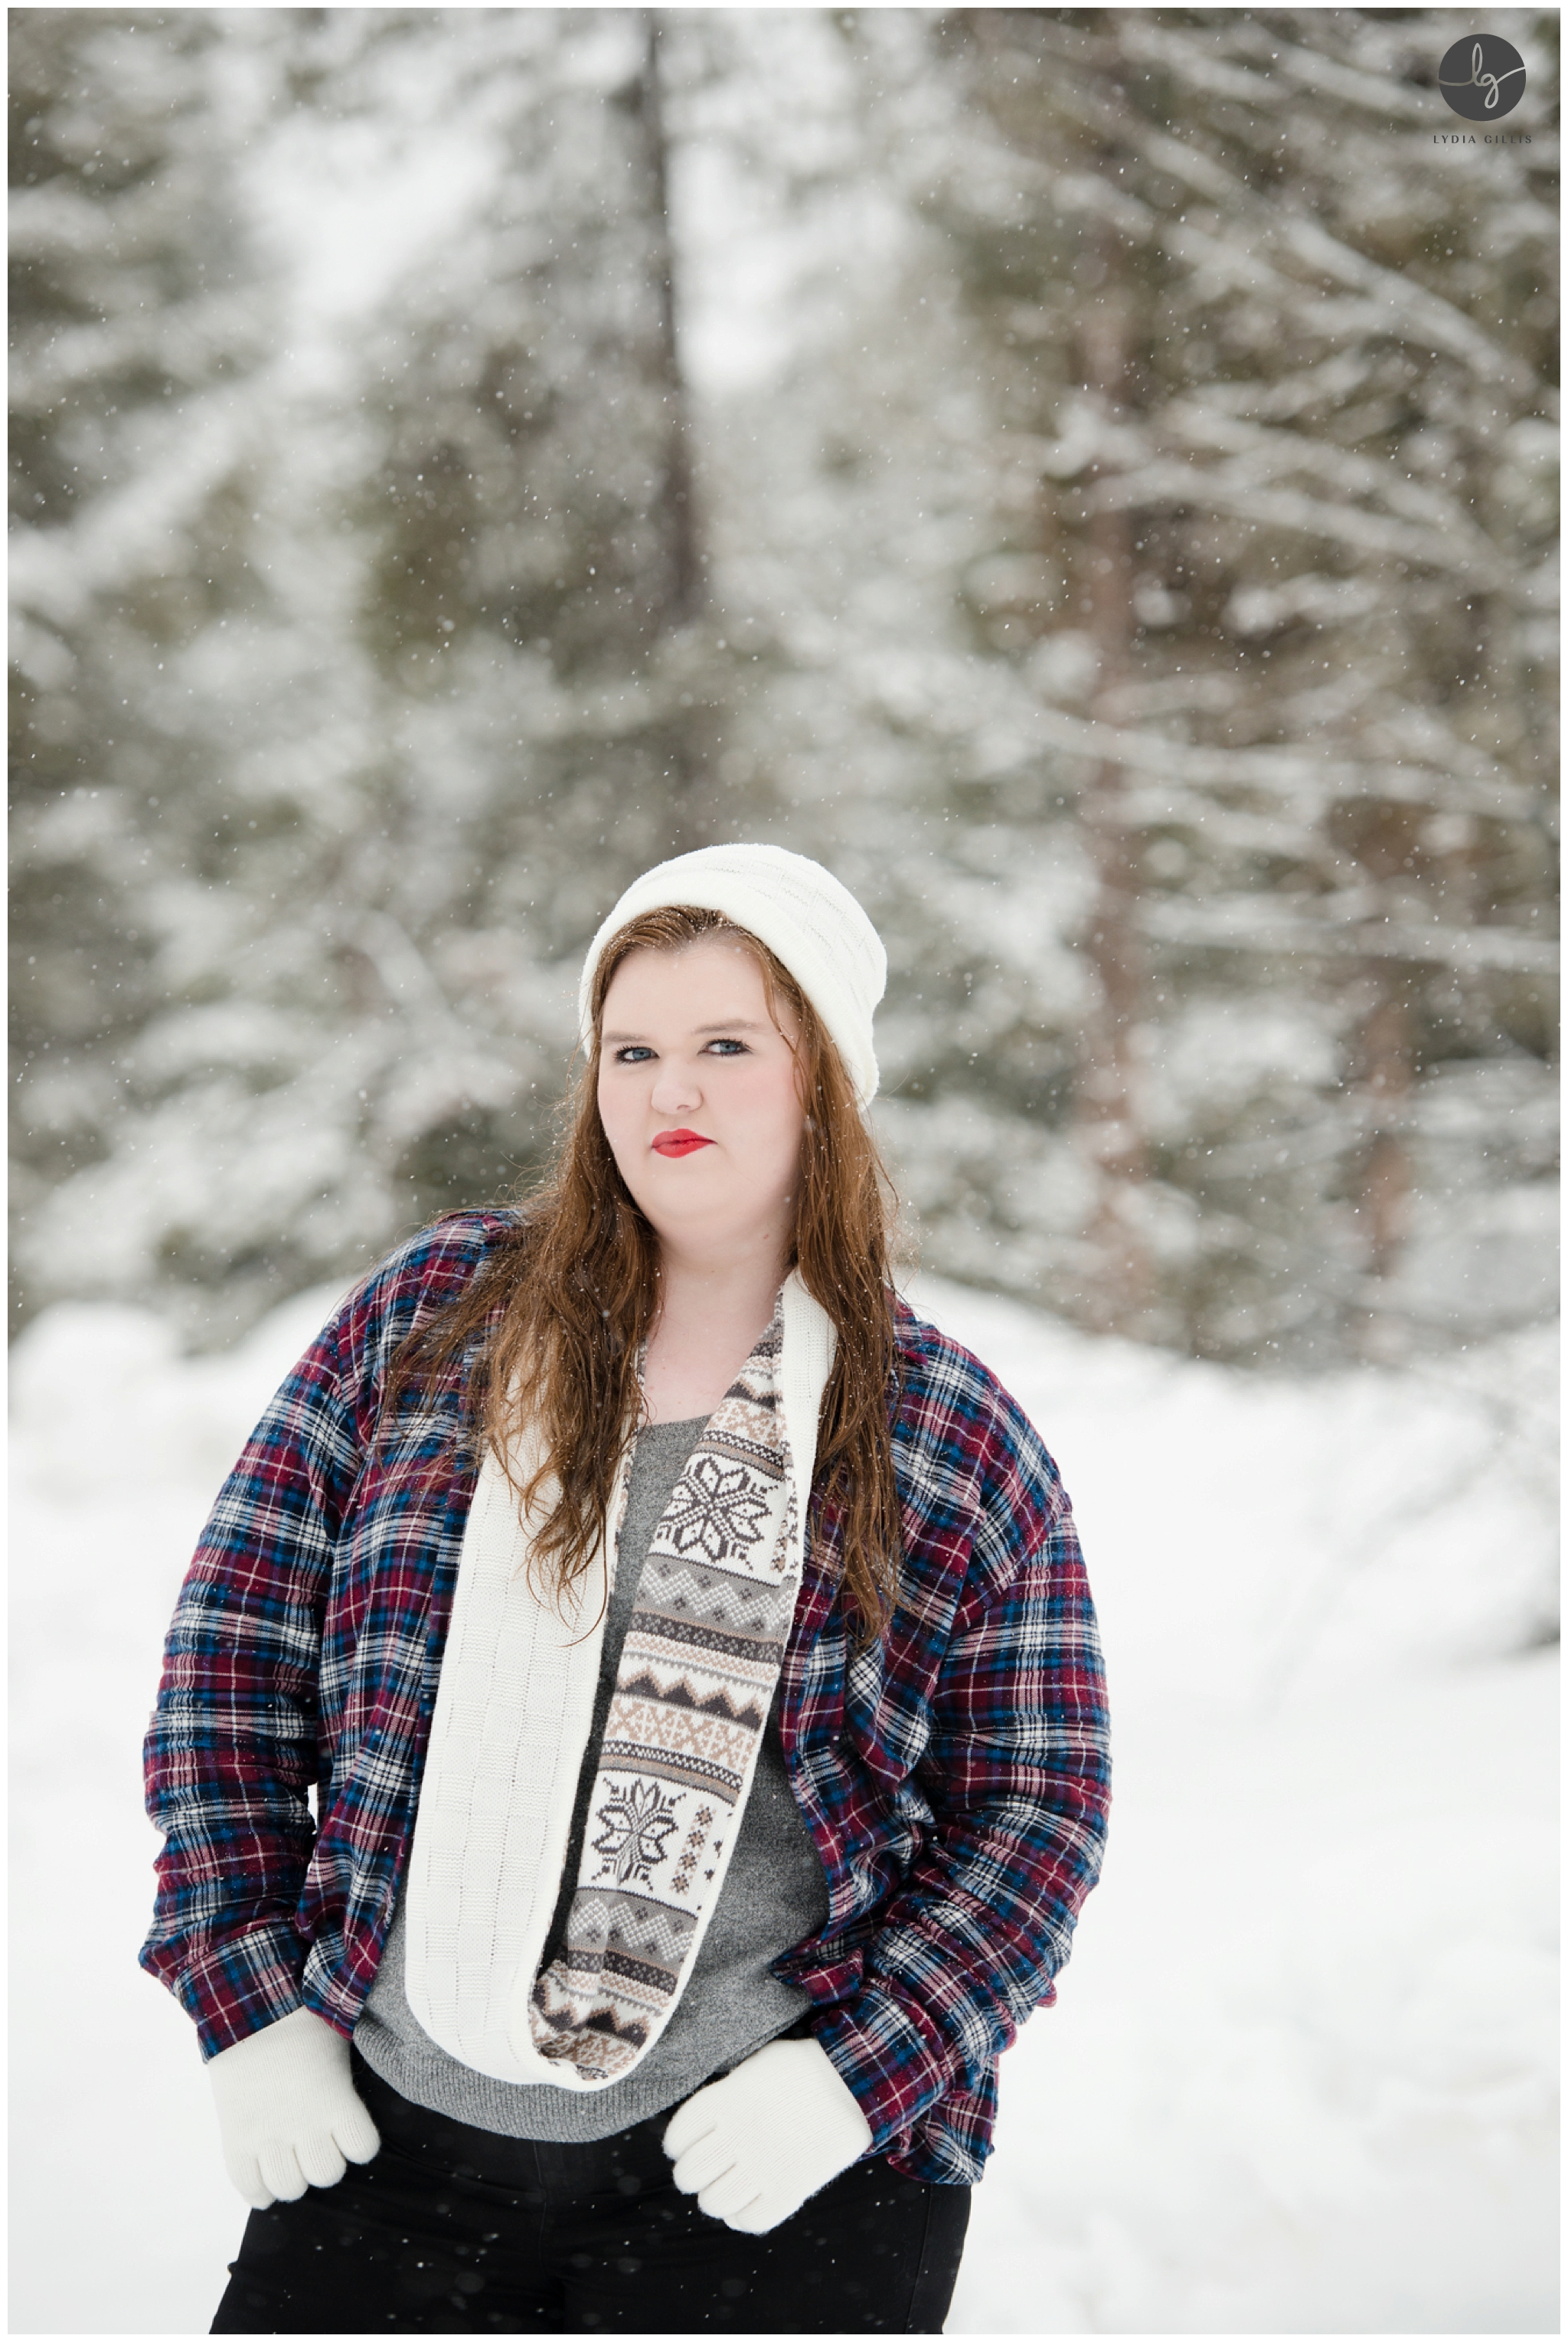 girl playing in the snow, willamette pass | Lydia Gillis Photography